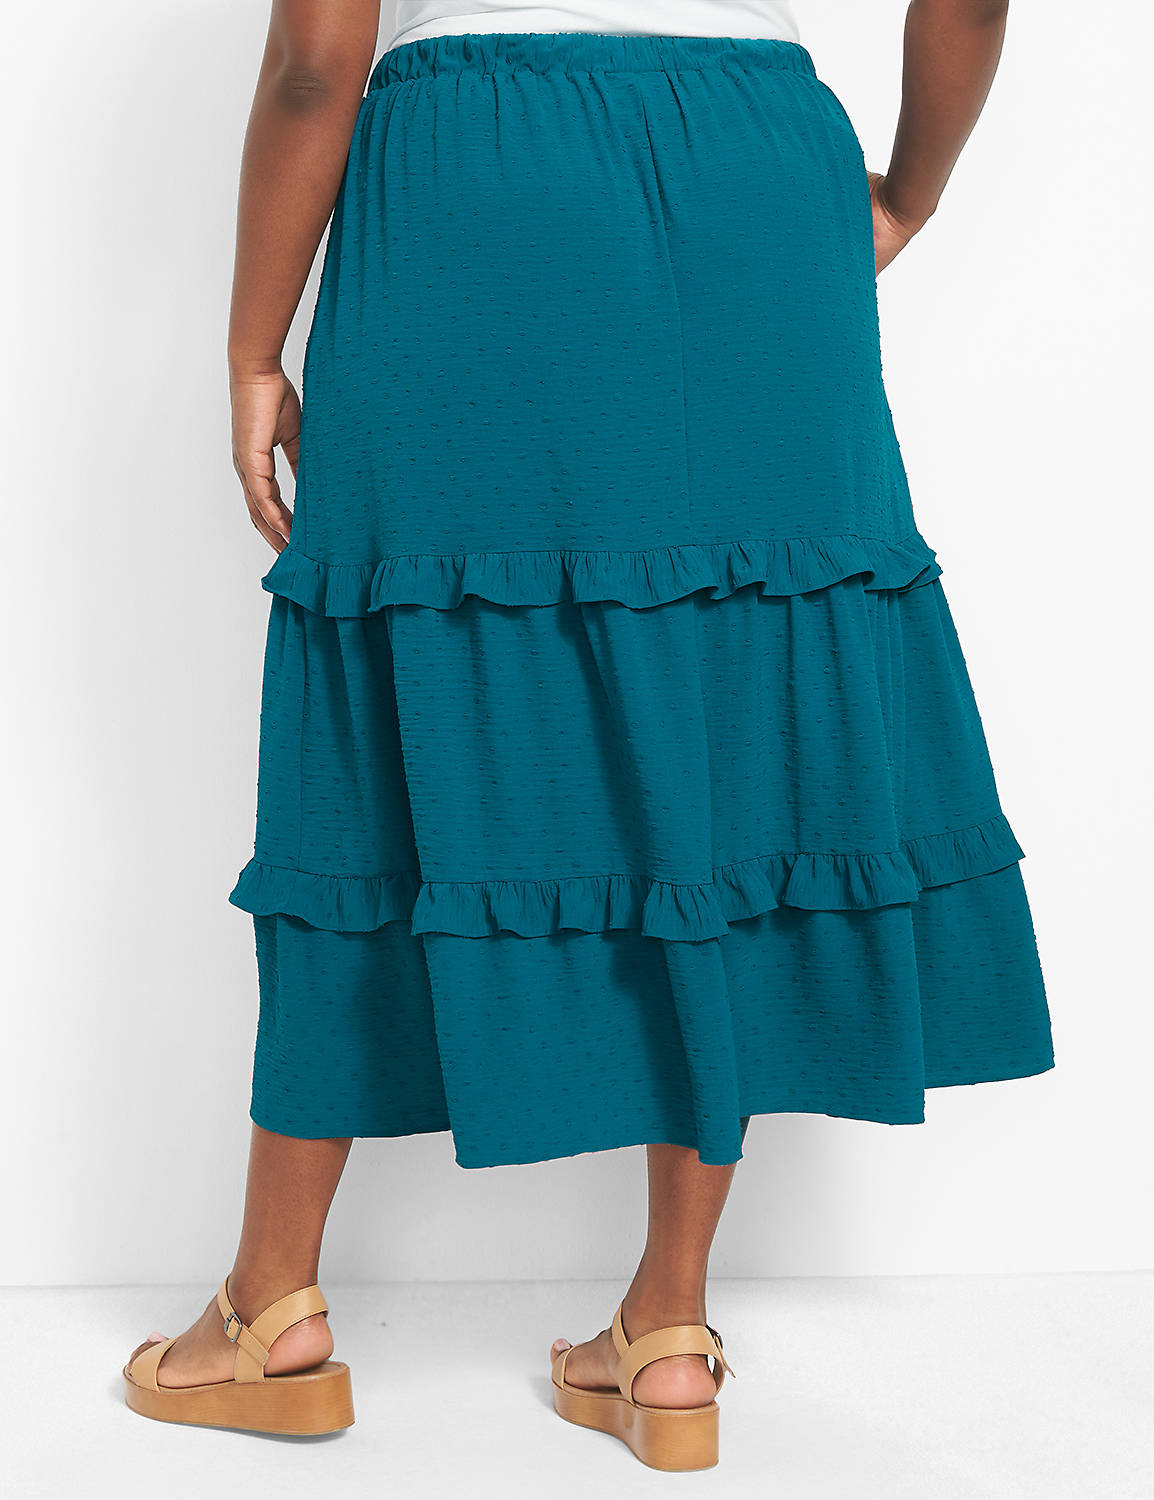 Pull On Tiered Maxi Skirt (Matchbac Product Image 2